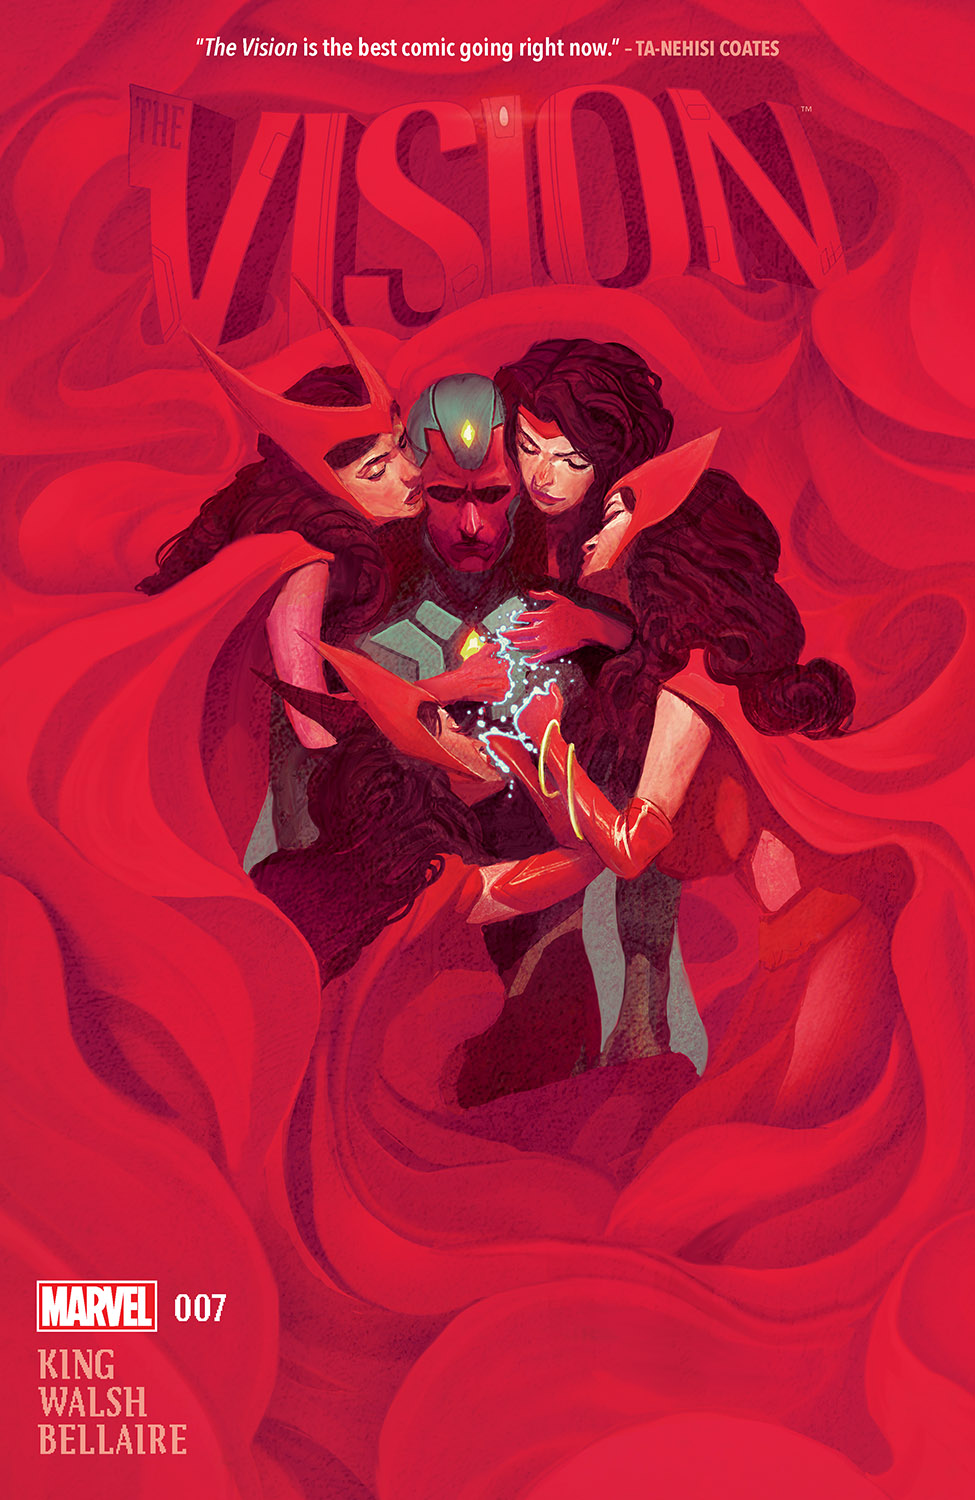 Vision #7 Cover art with Scarlet Witch and Vision